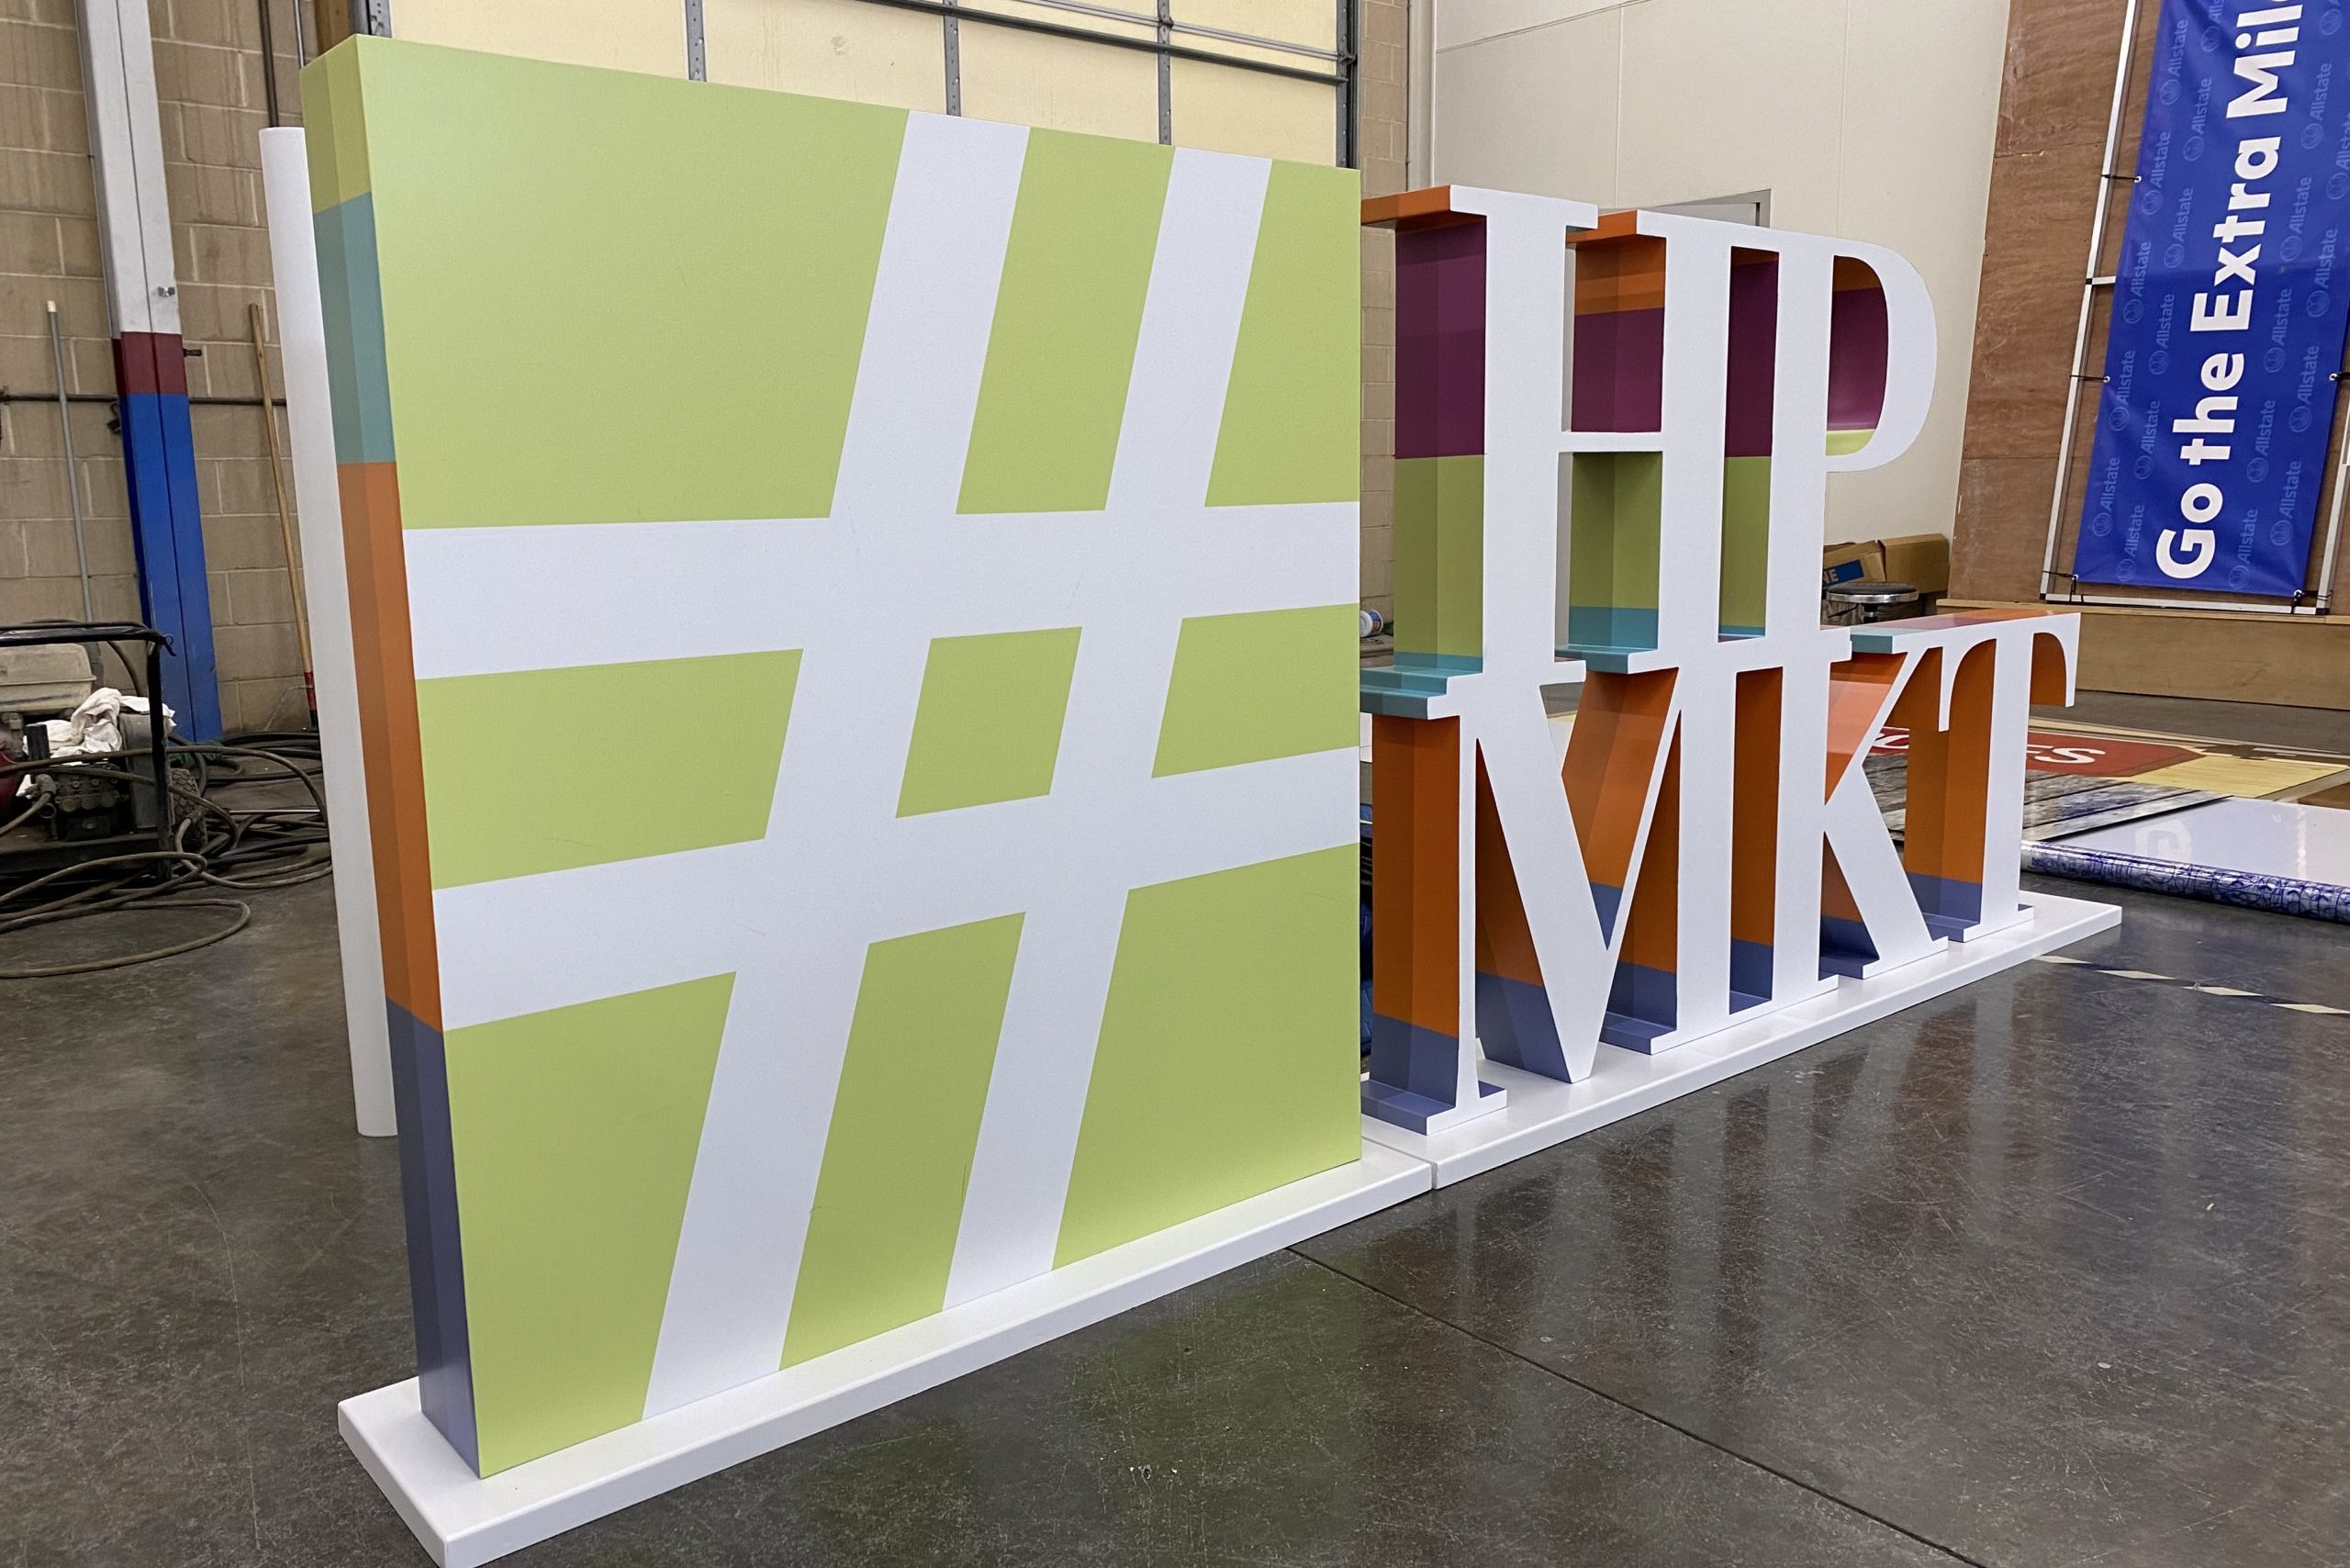 A #HPMKT photo-op sign sits in our fabrication space.